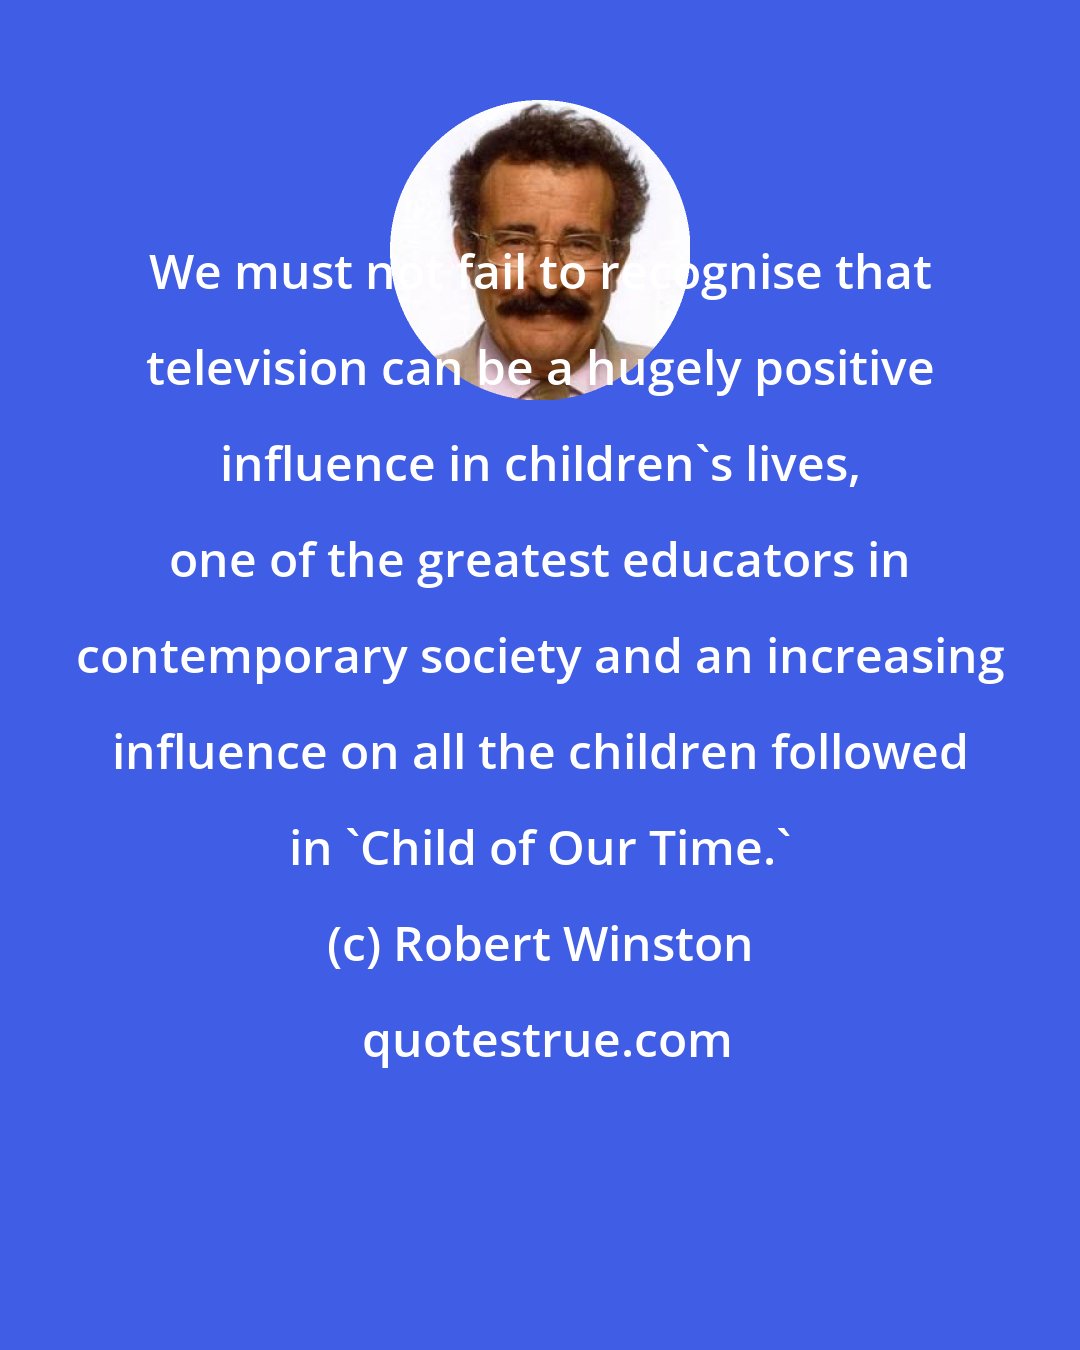 Robert Winston: We must not fail to recognise that television can be a hugely positive influence in children's lives, one of the greatest educators in contemporary society and an increasing influence on all the children followed in 'Child of Our Time.'